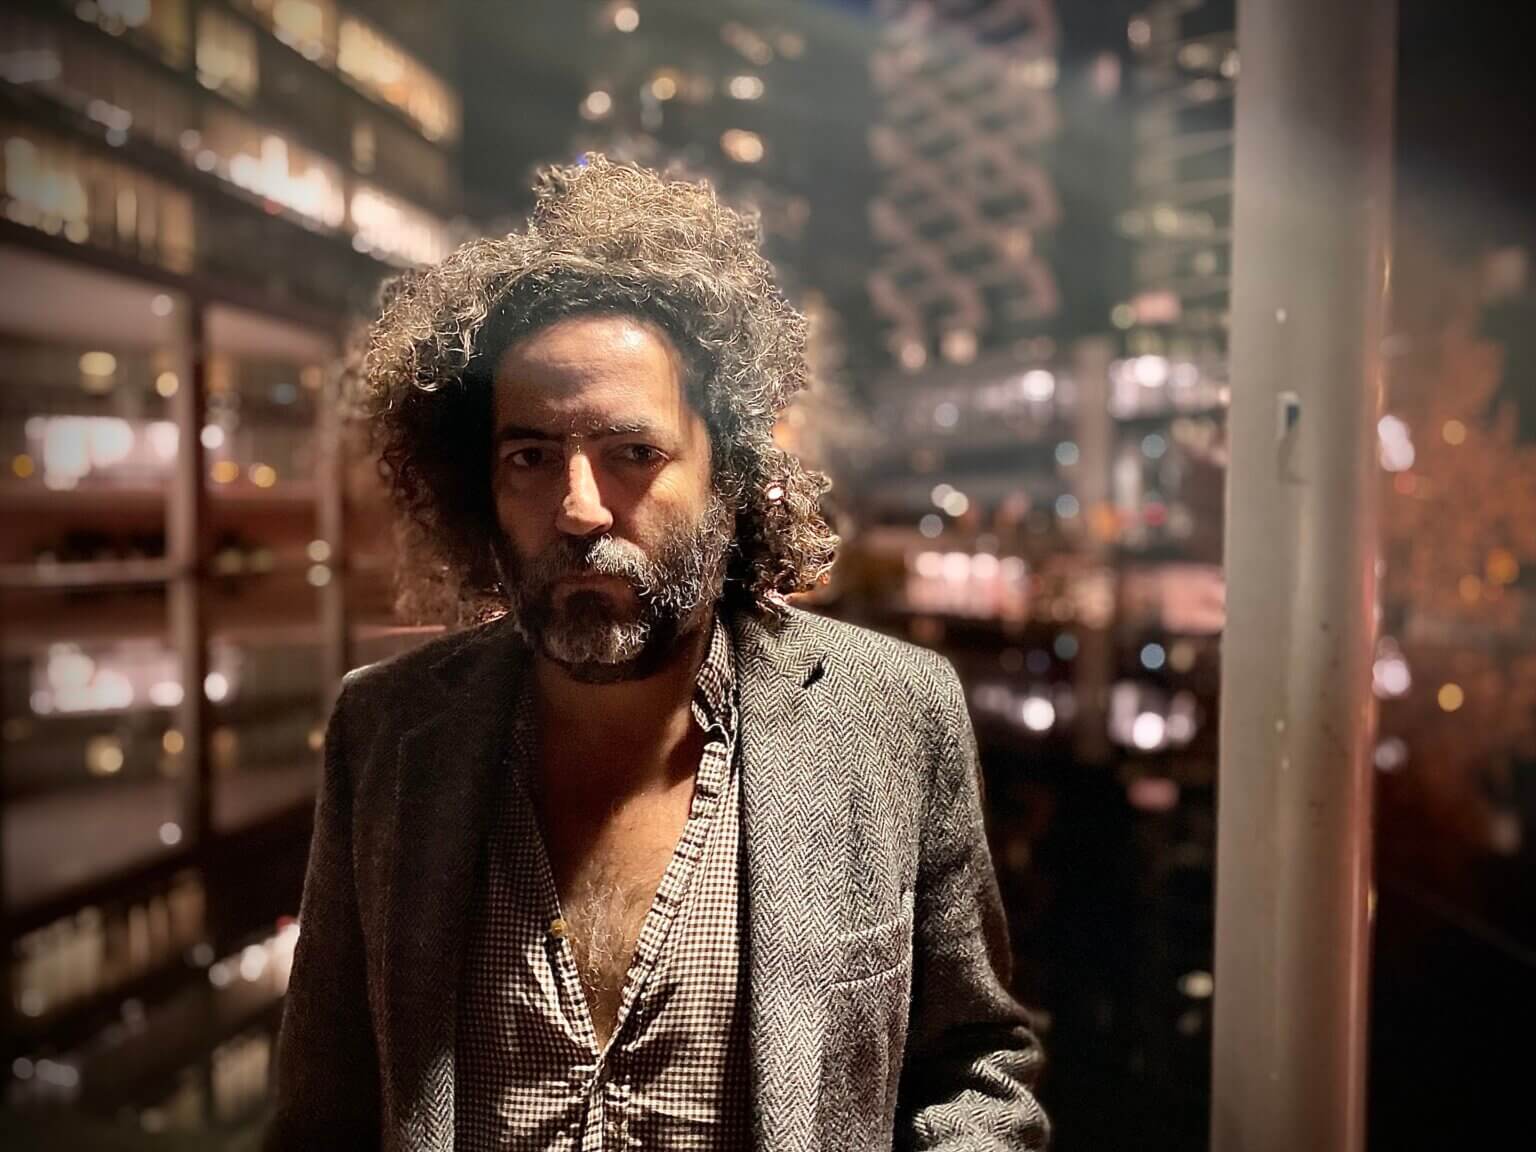 Dan Bejar Wrestles Out of Song Form for Destroyer’s Latest: Gregory Adams spoke with the band's singer/songwriter about LABYRINTHITIS and more